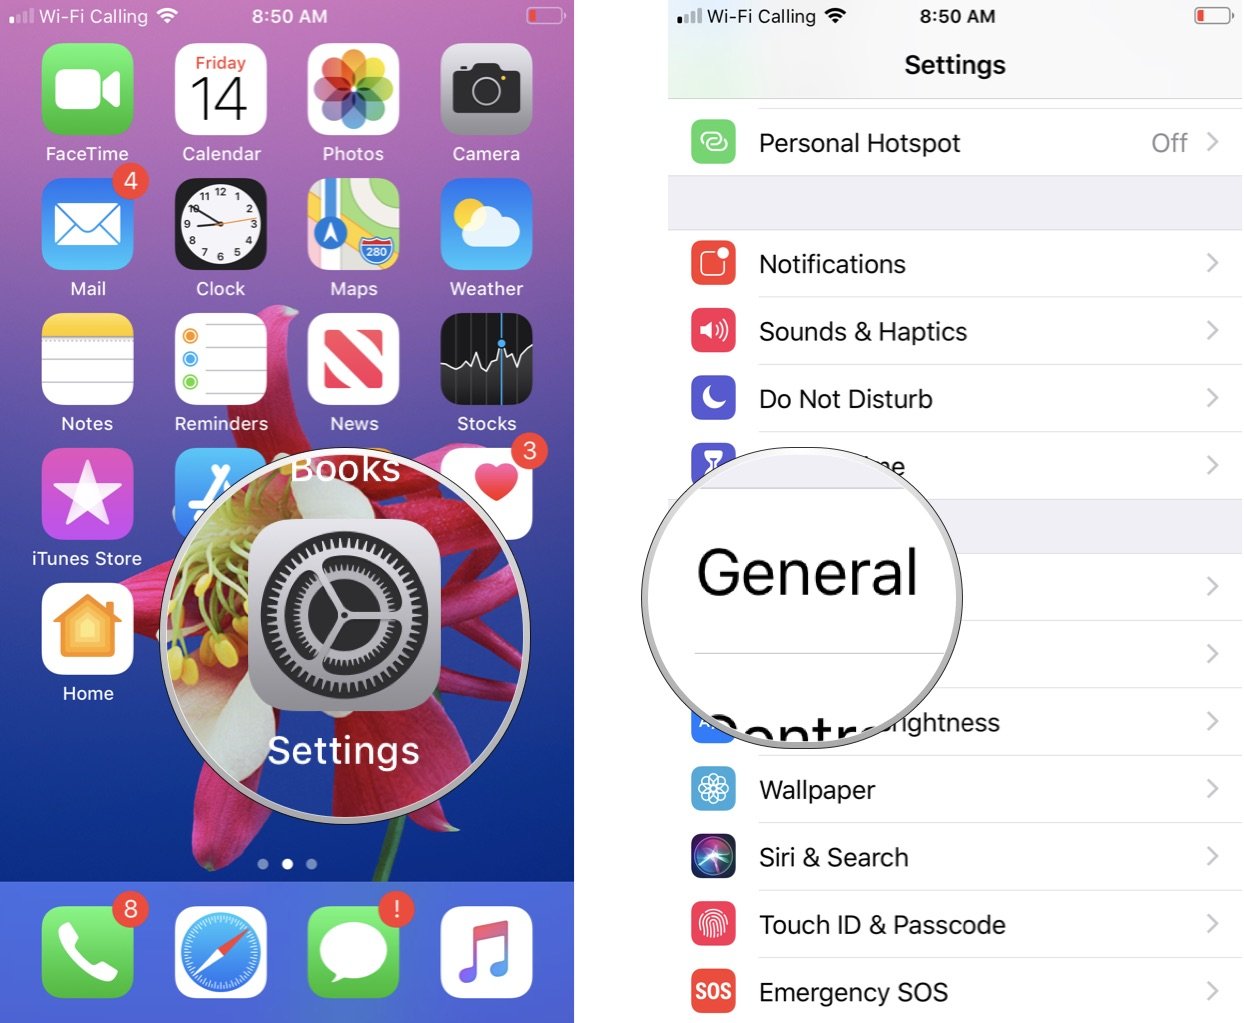 To enable or disable Handoff on iPhone and iPad, launch the Settings app on your device. Then tap General.